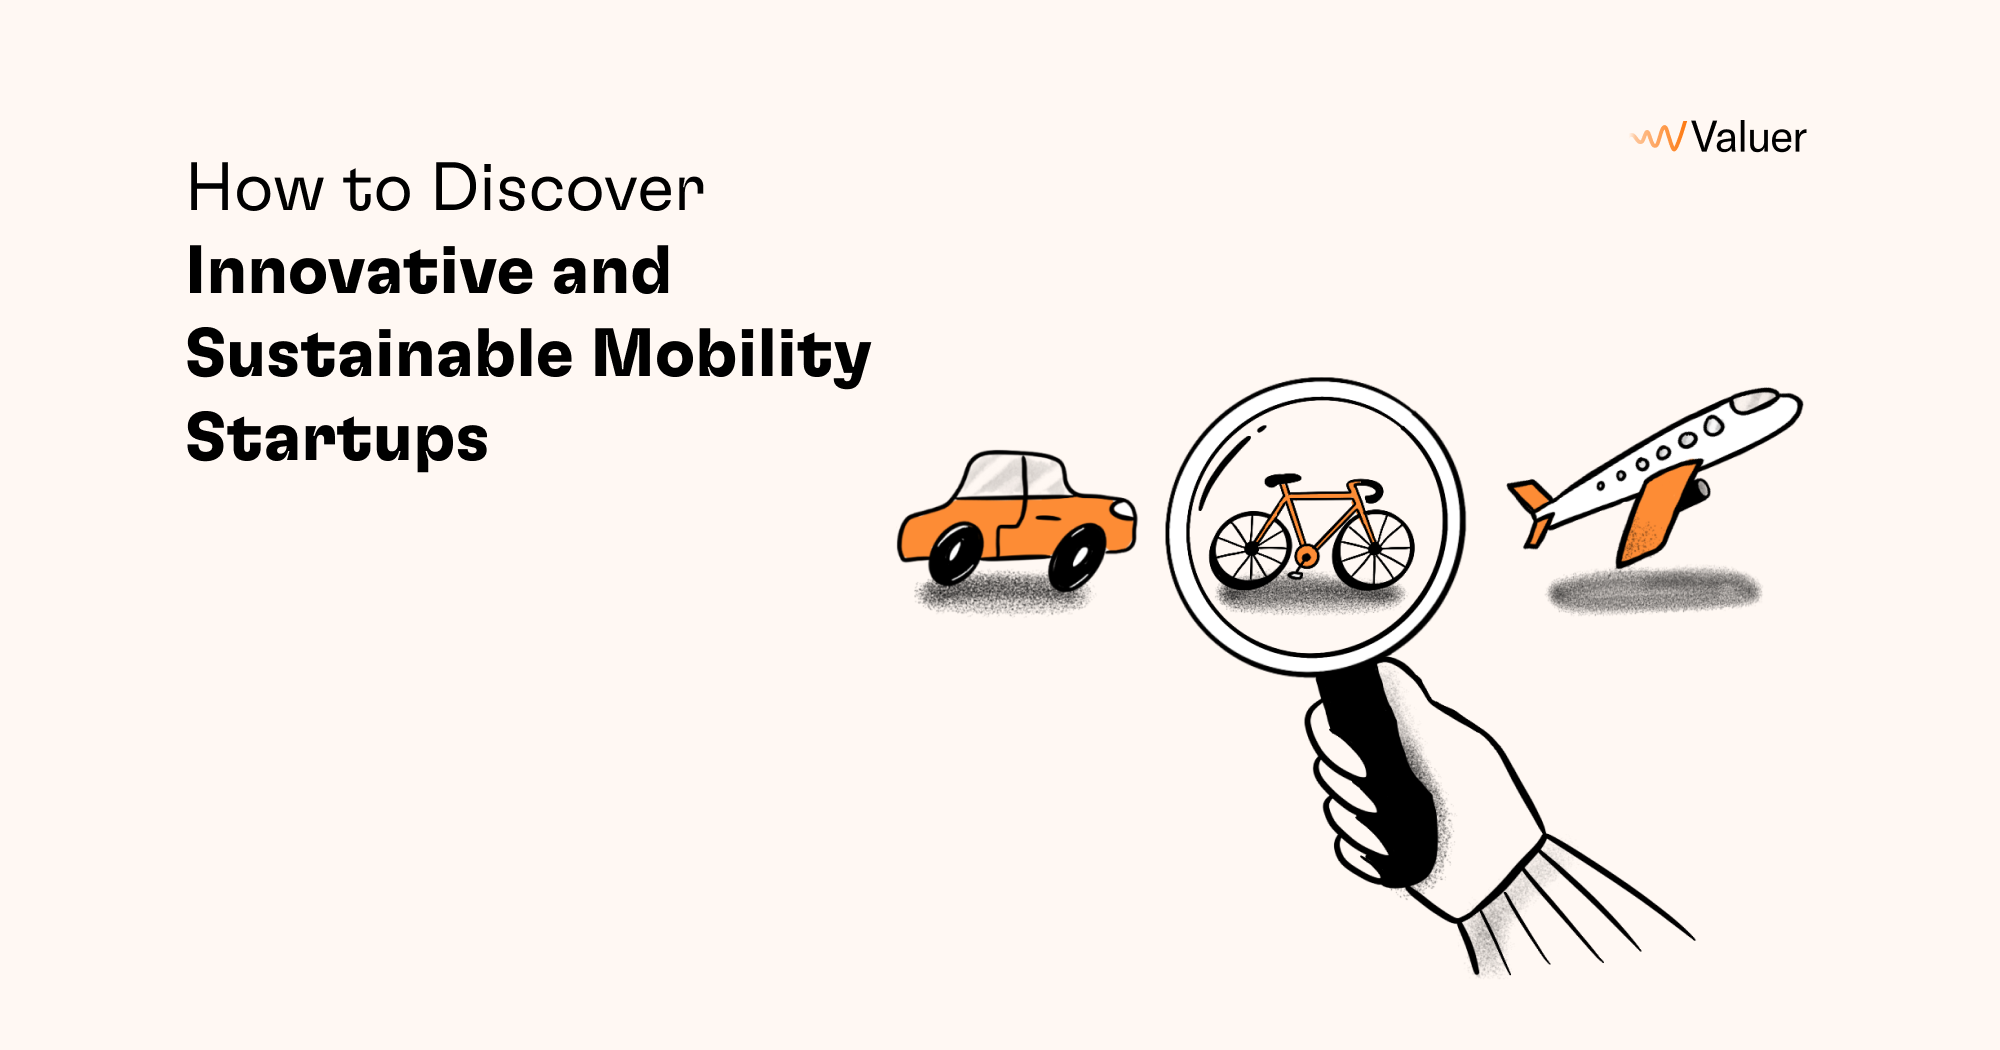 How to Discover Innovative and Sustainable Mobility Startups